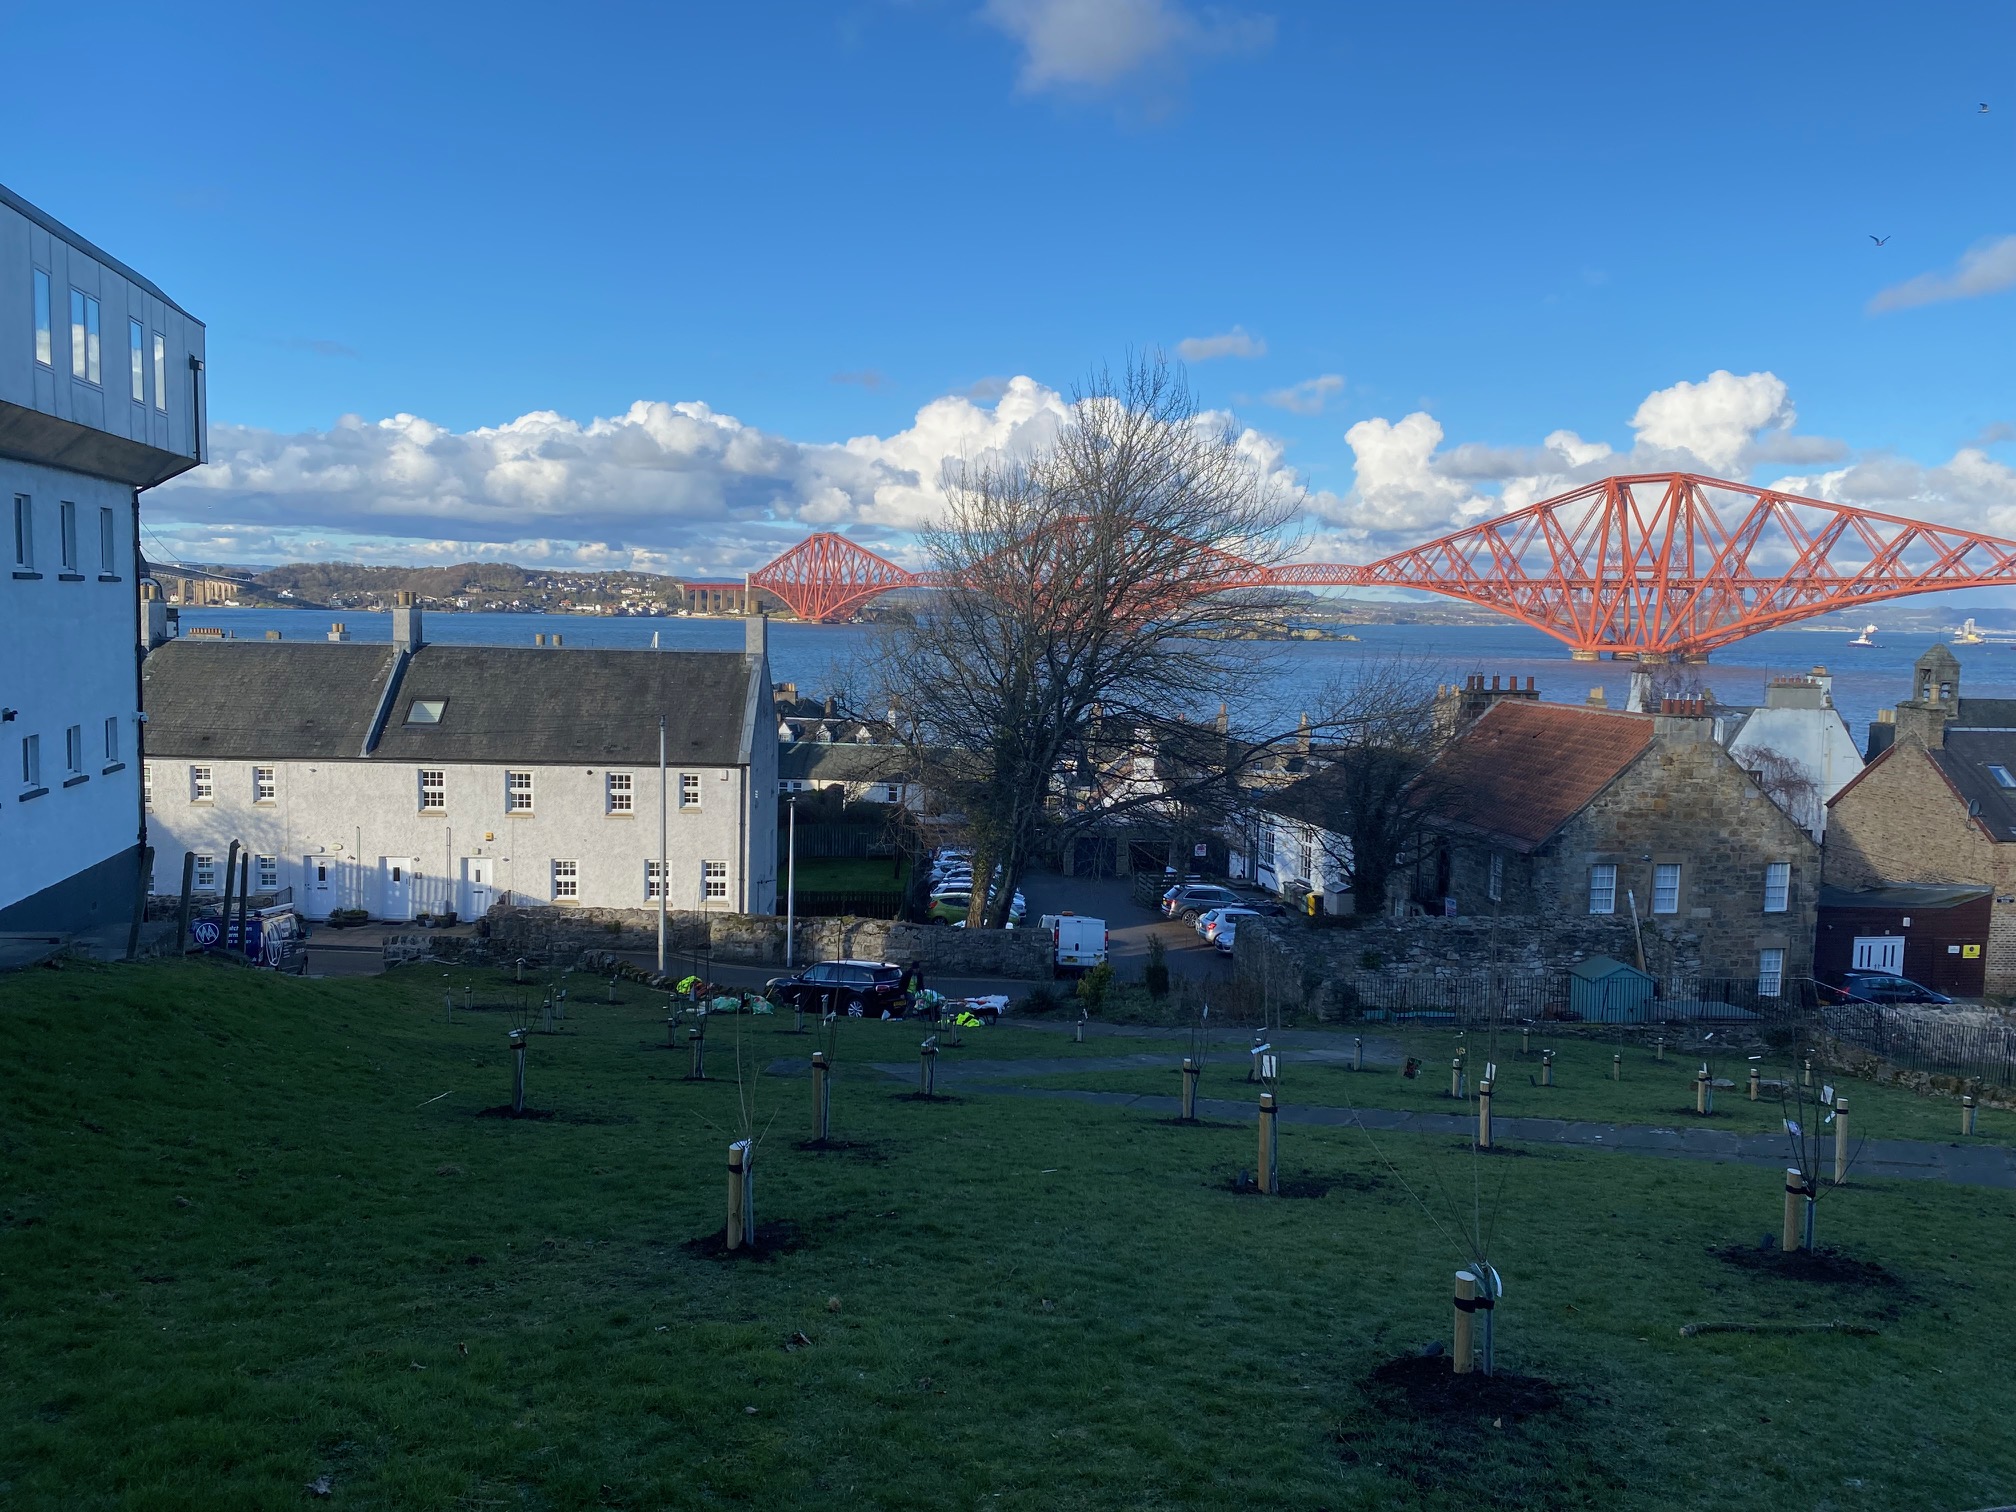 South Queensferry community orchard warmly welcomed by locals